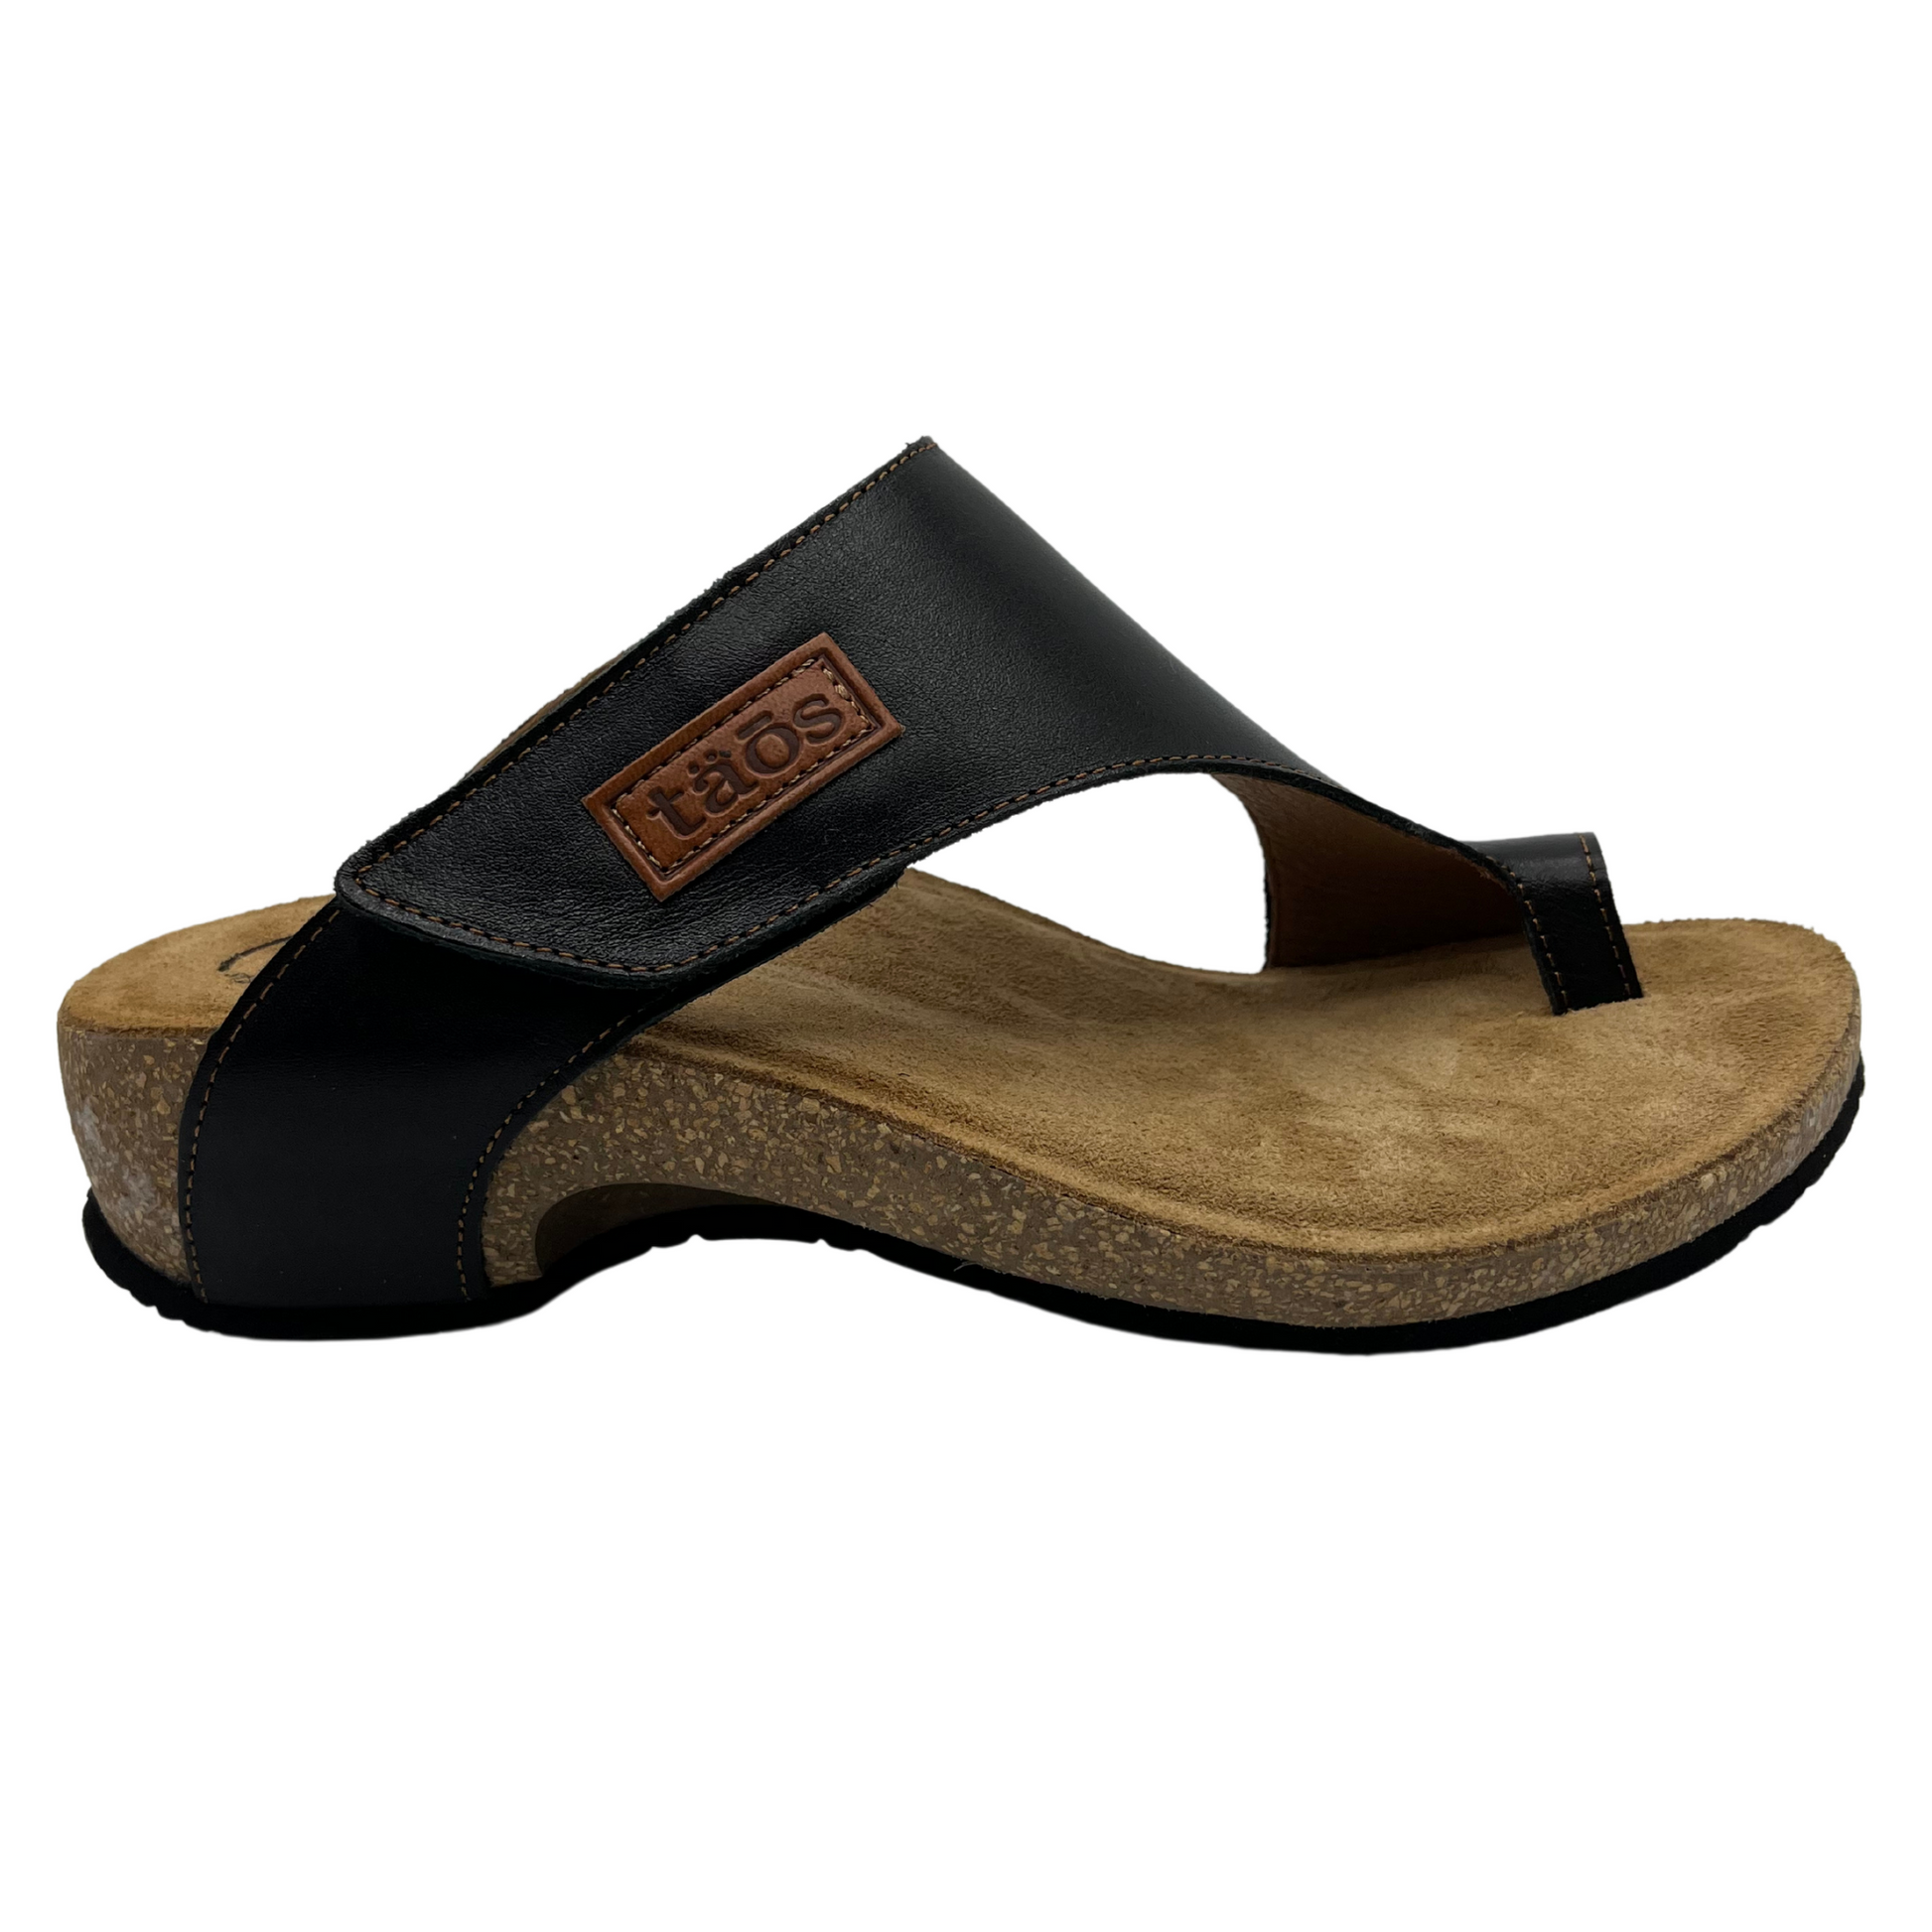 Right facing view of black leather sandal with brown leather lined footbed. Hook and loop closure on strap and toe strap